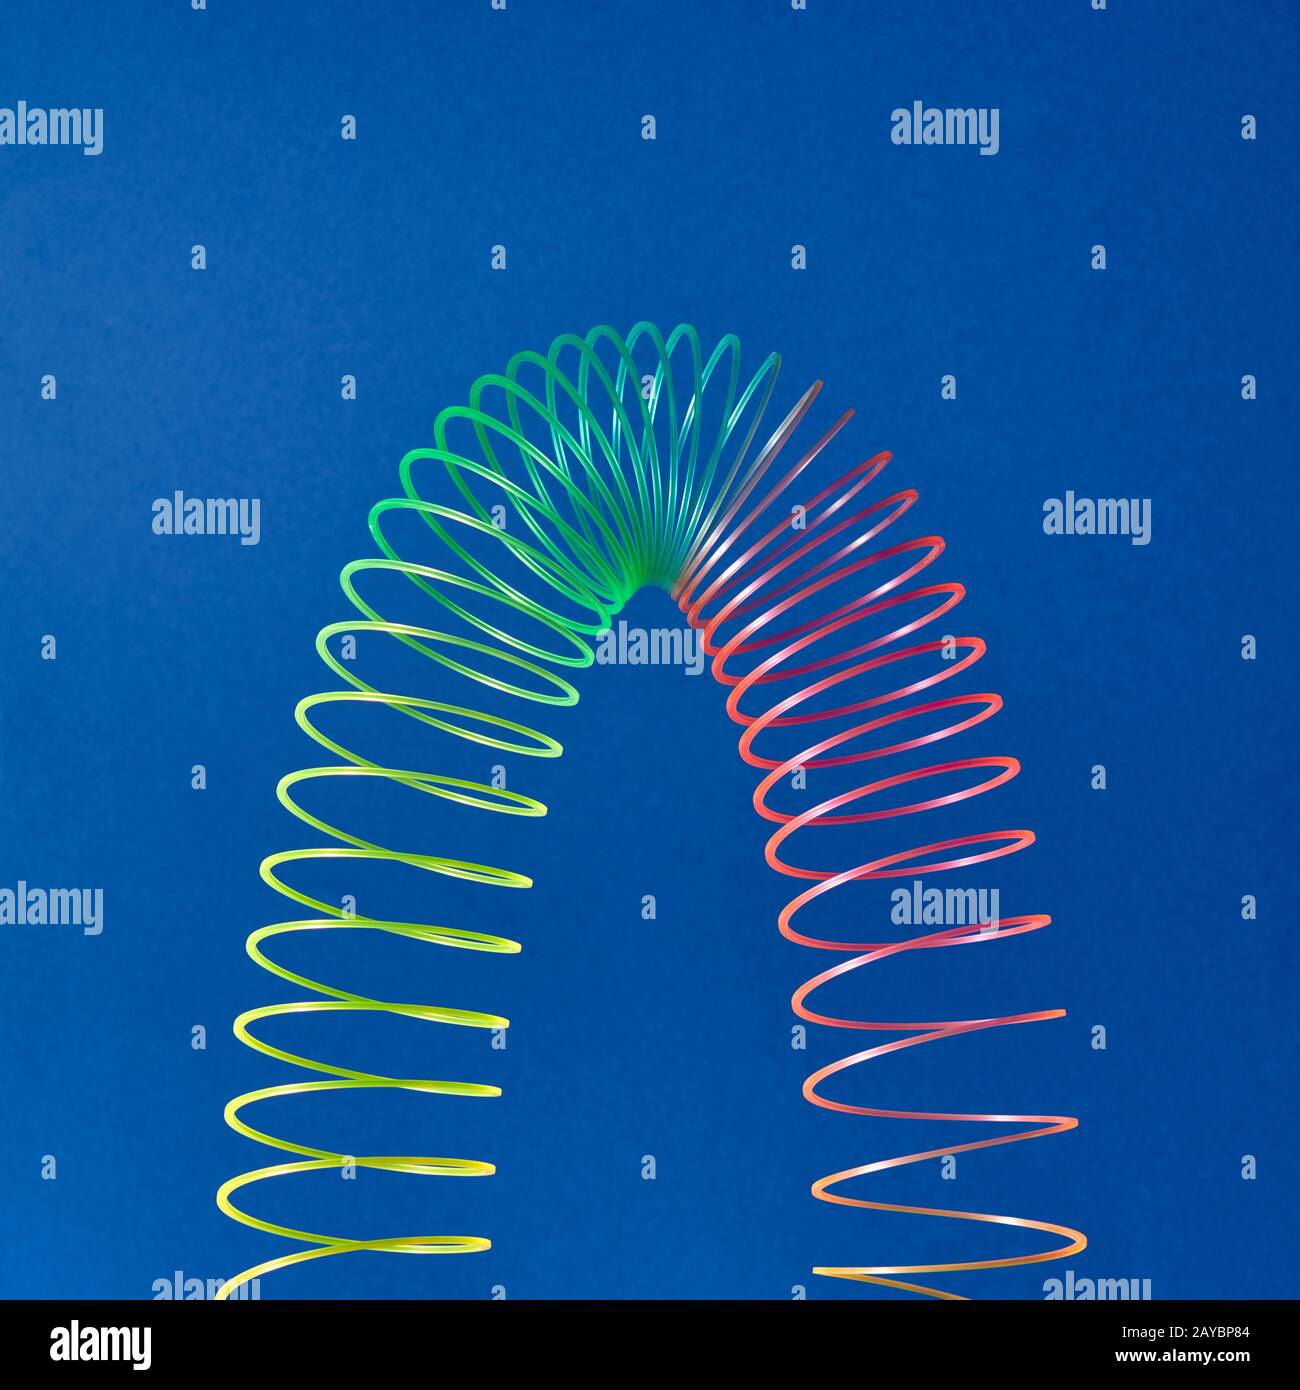 Flexible plastic rainbow spring on a blue background. Stock Photo